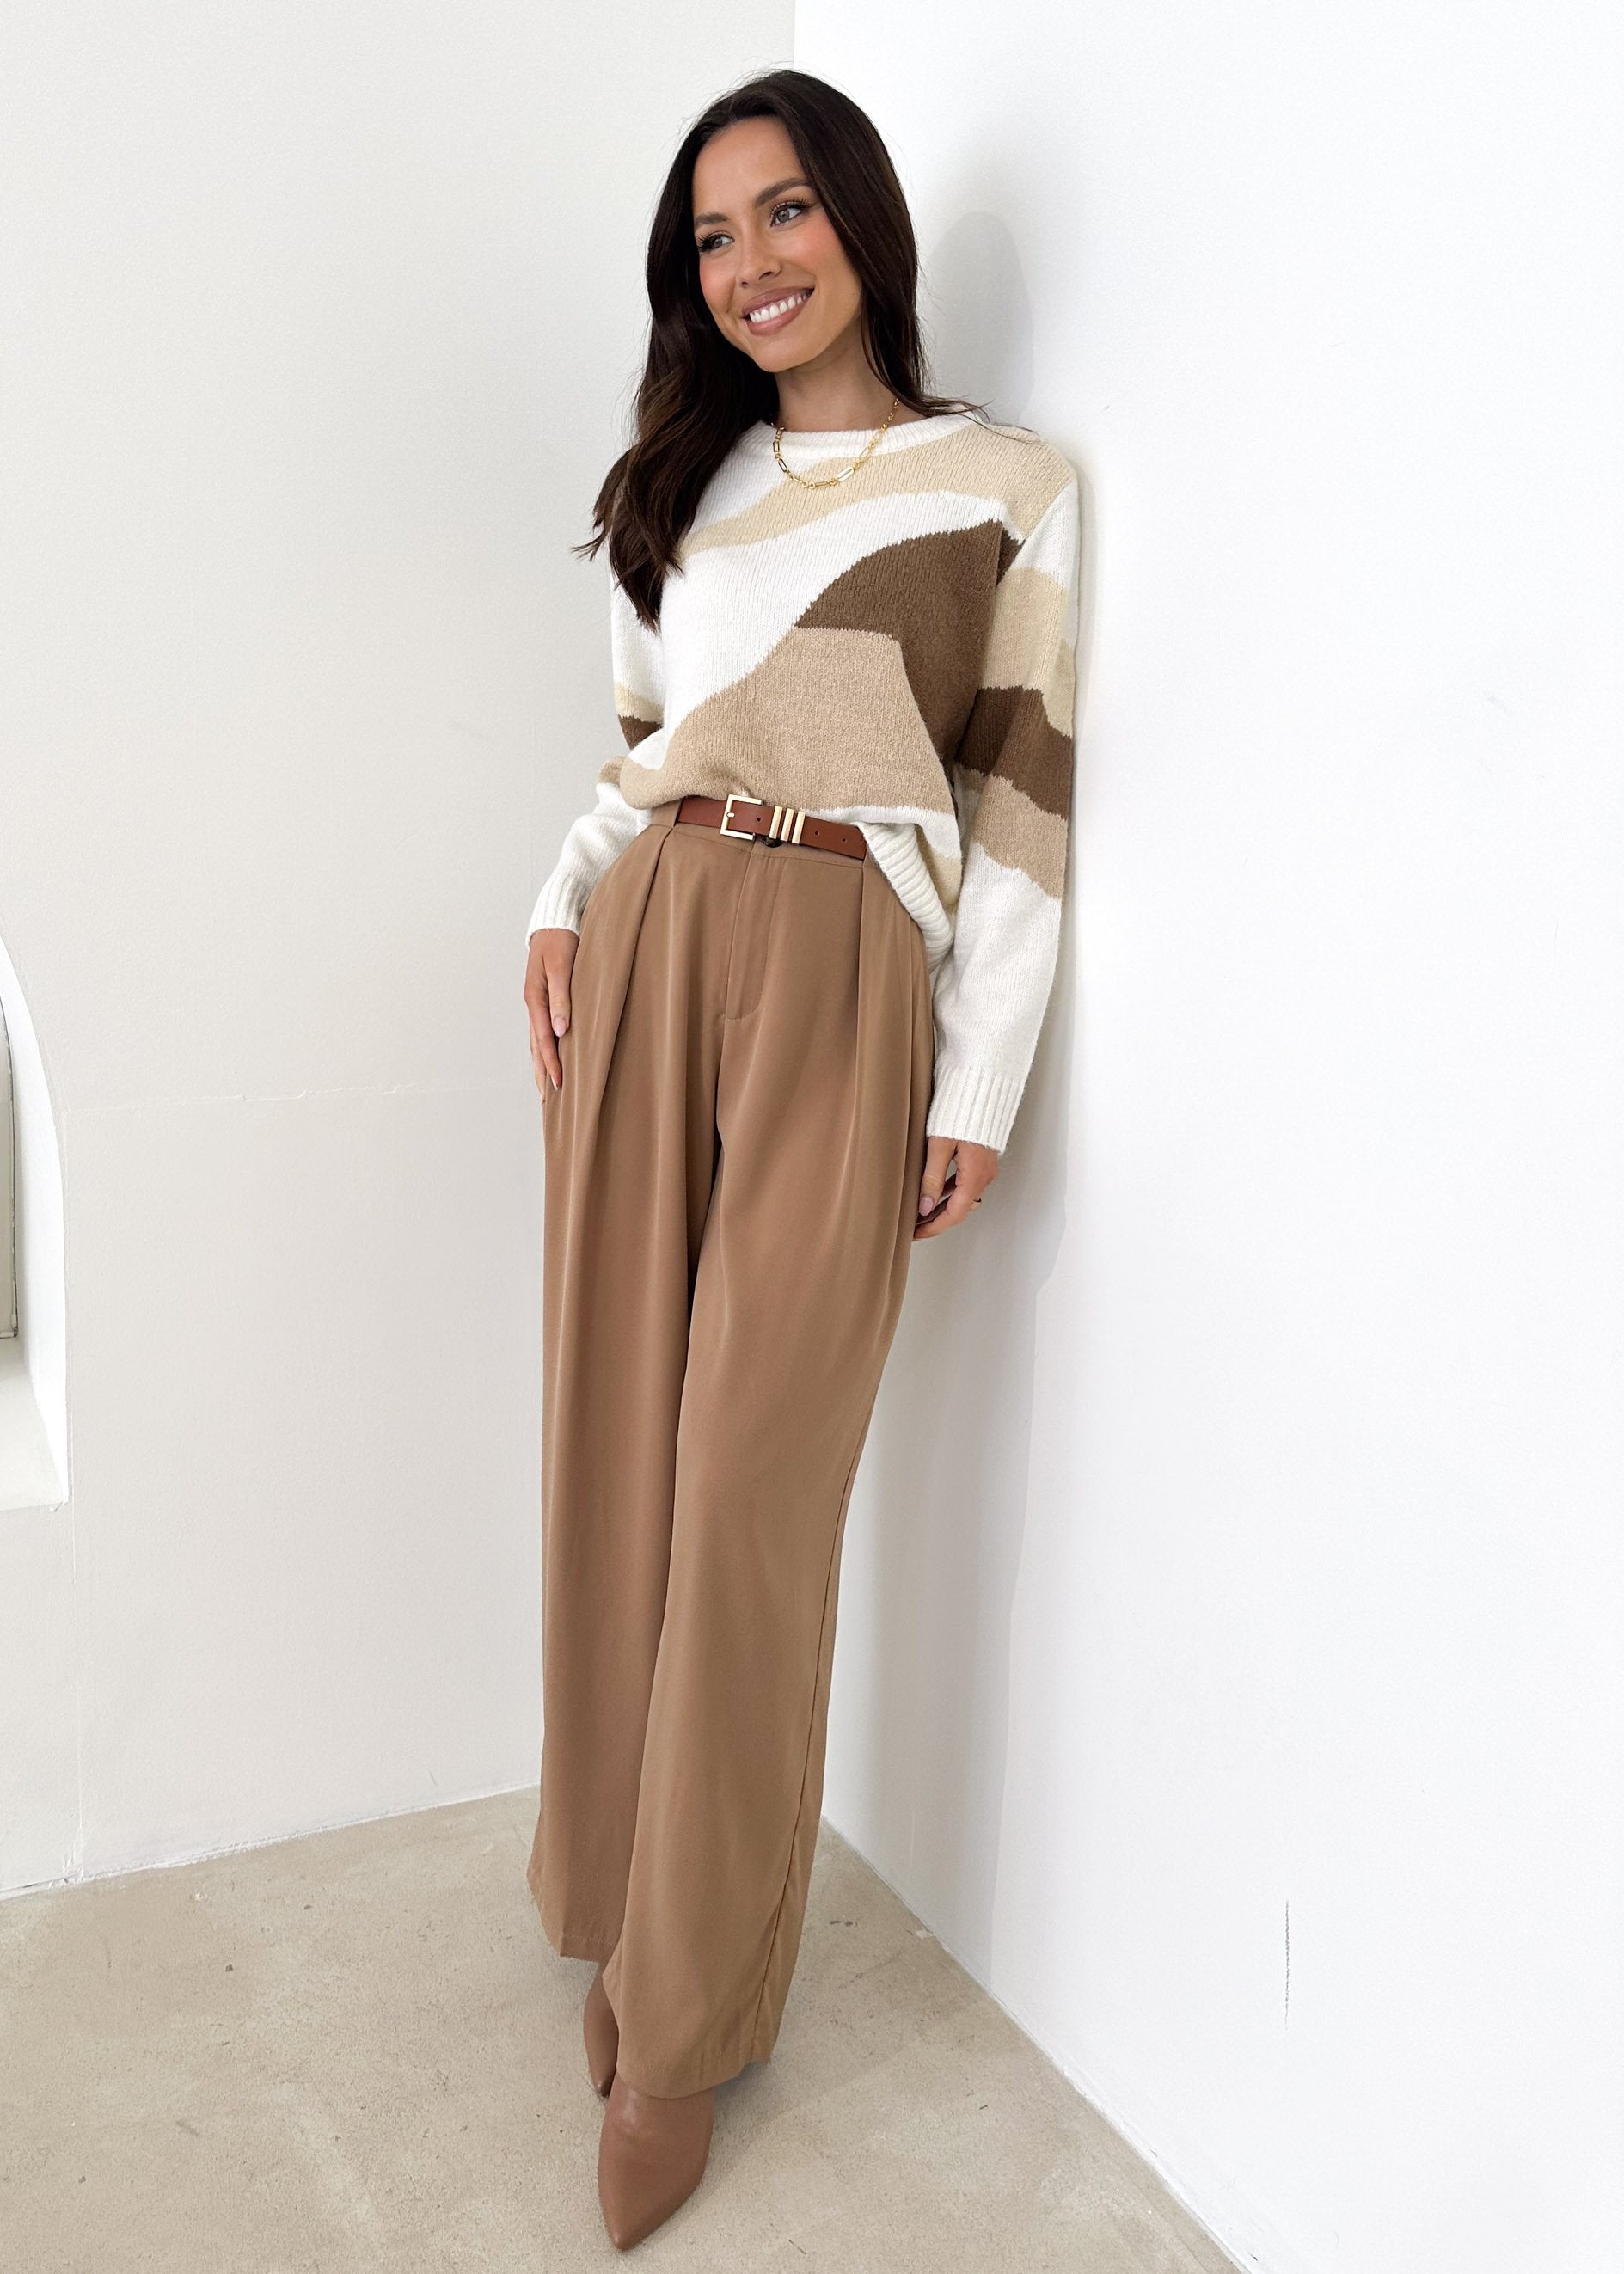 Issarae Sweater - Brown Abstract